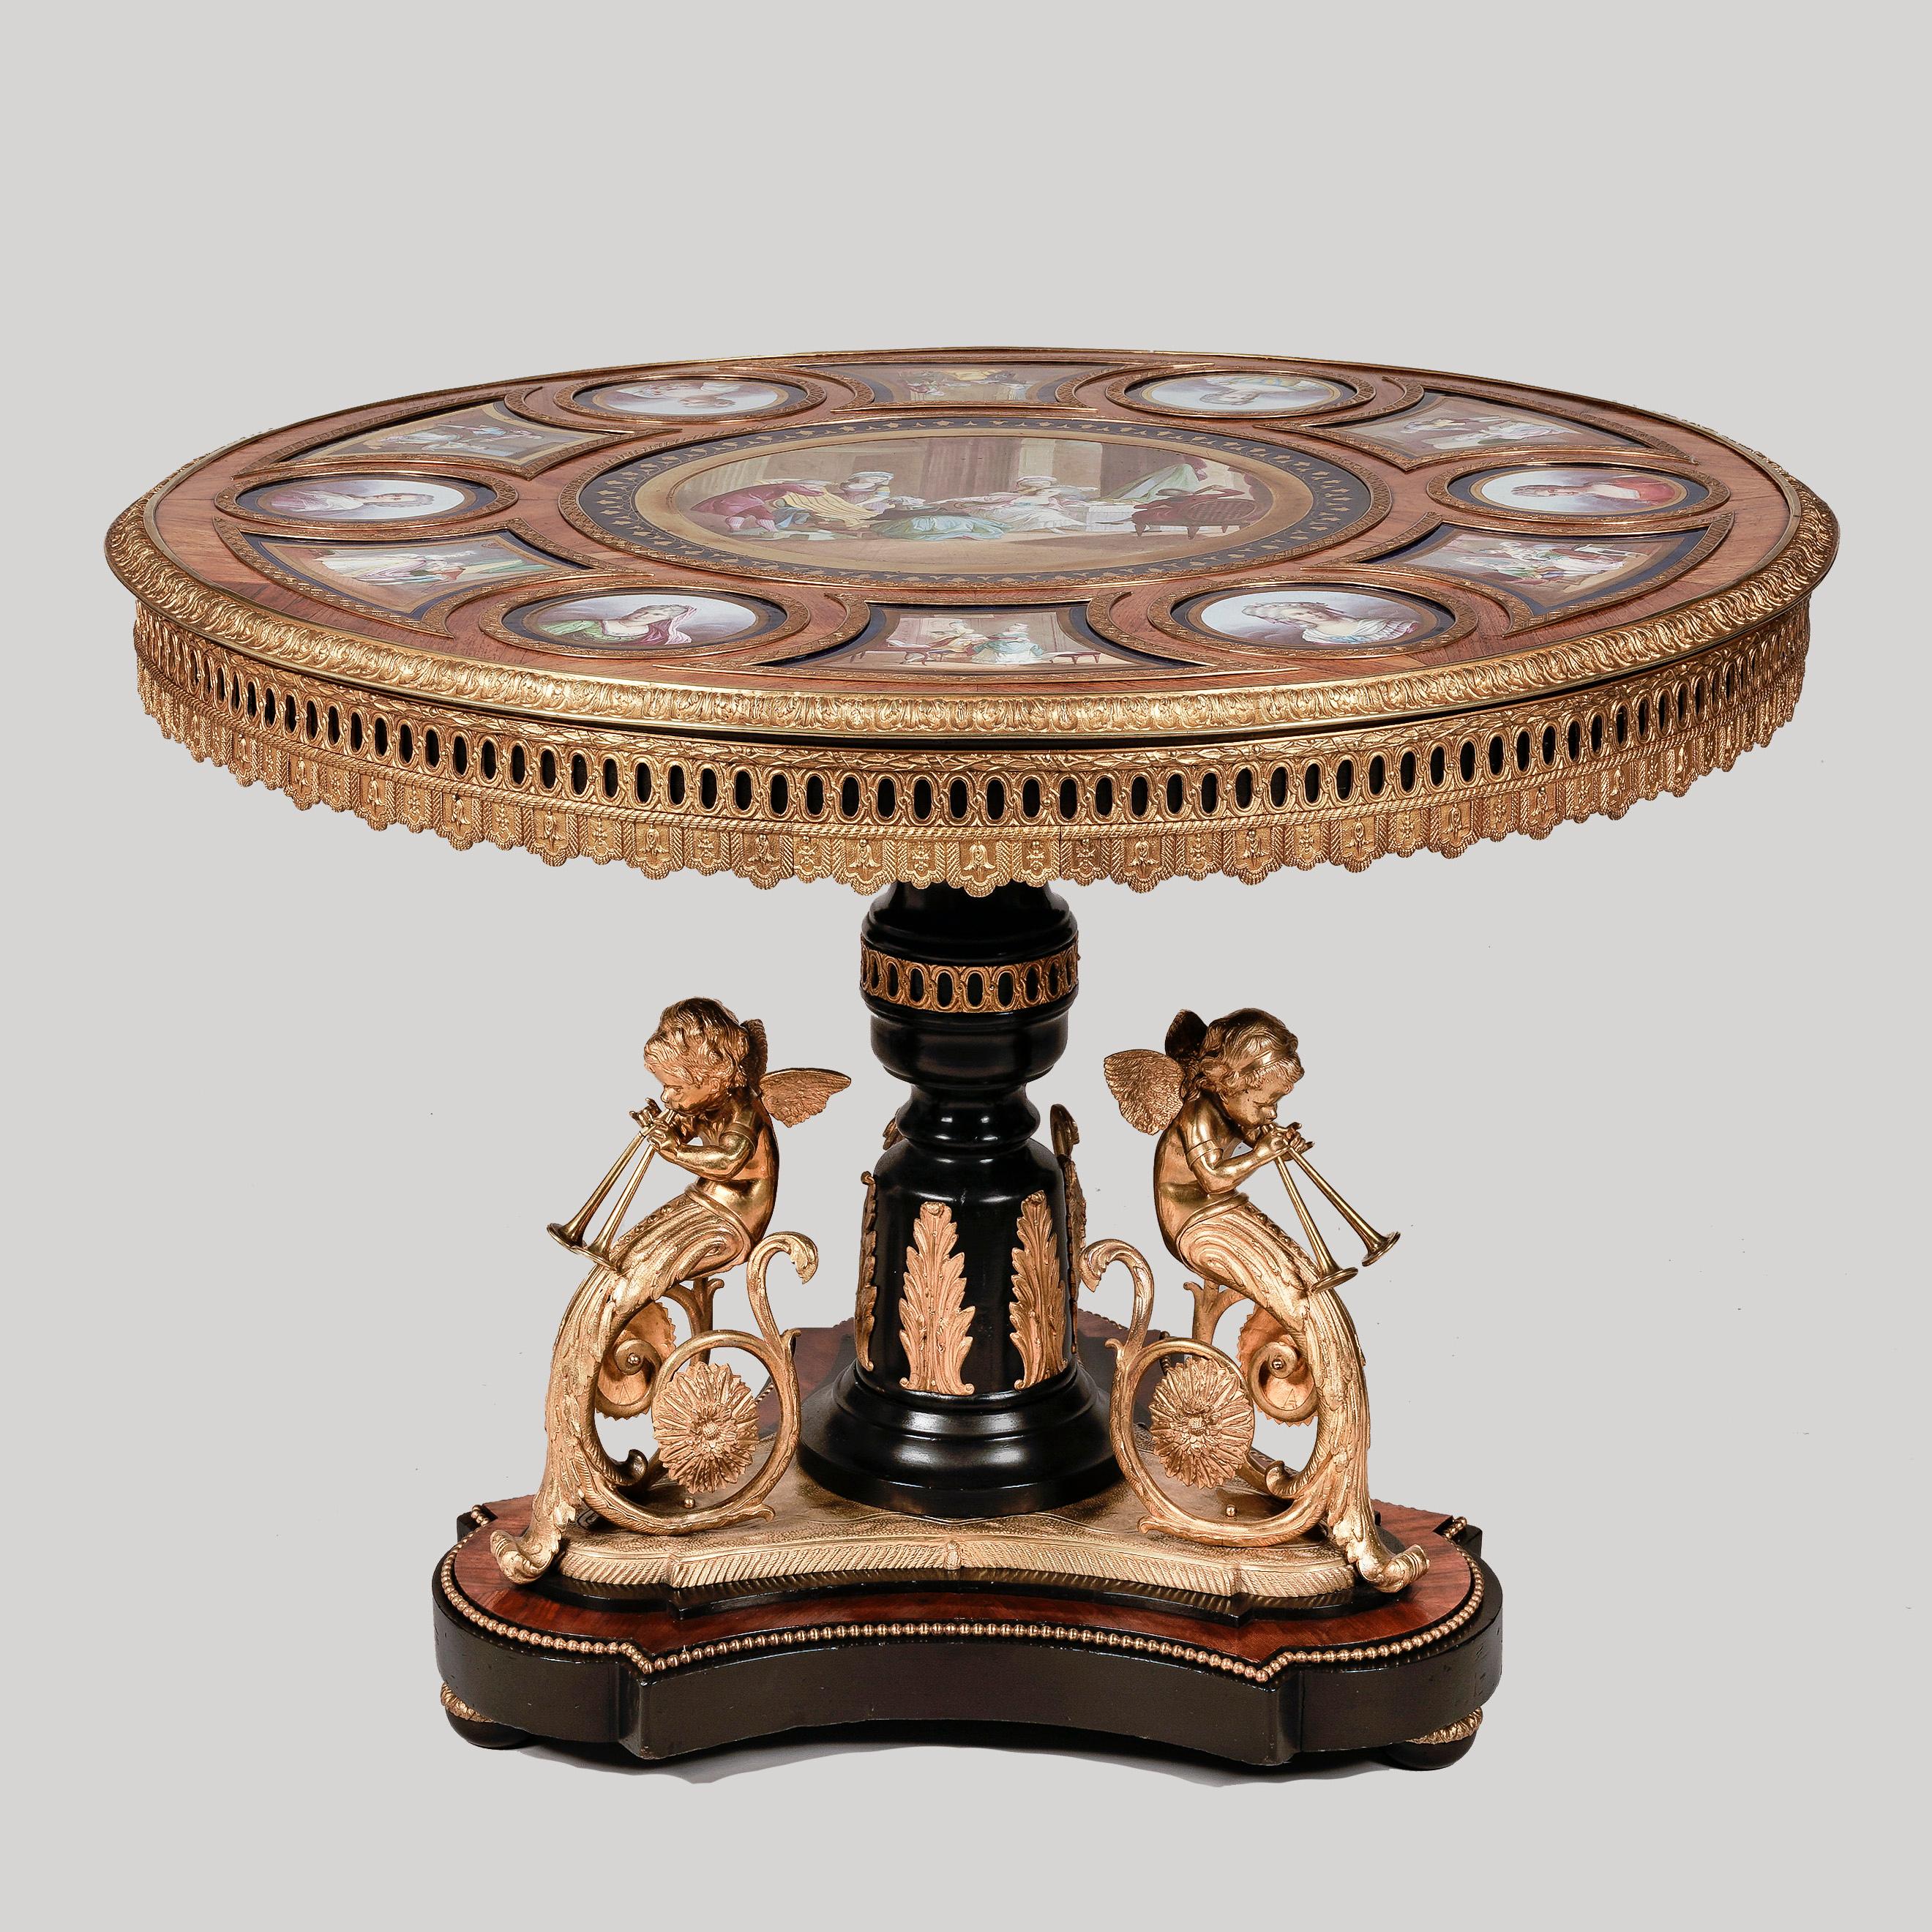 A superb gueridon centre table.
with sèvres style porcelain panels.

Constructed from bois noirci and kingwood with mercury fire gilded ornament, the central support rising from a tripartite plinth base on oblate bun feet and surmounted with